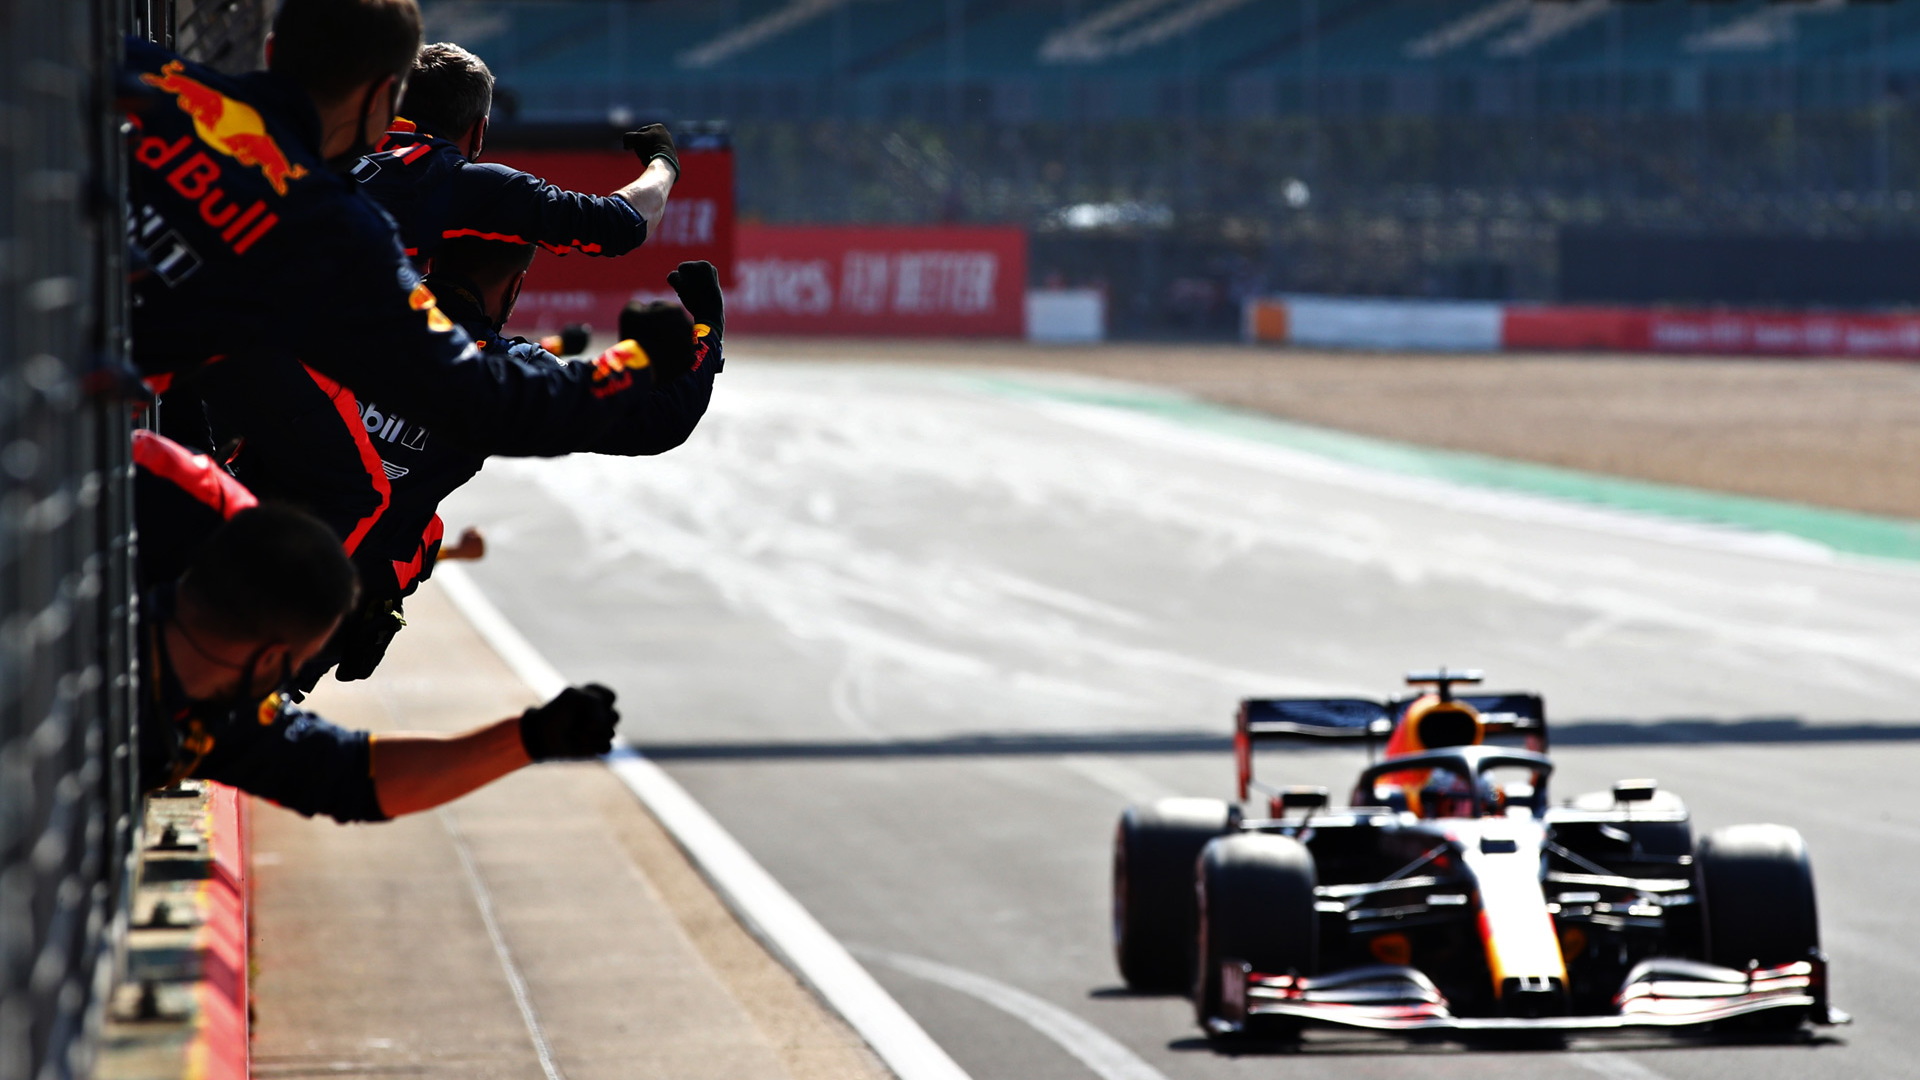 Red Bull Racing's Max Verstappen at the 2020 Formula One 70th Anniversary Grand Prix